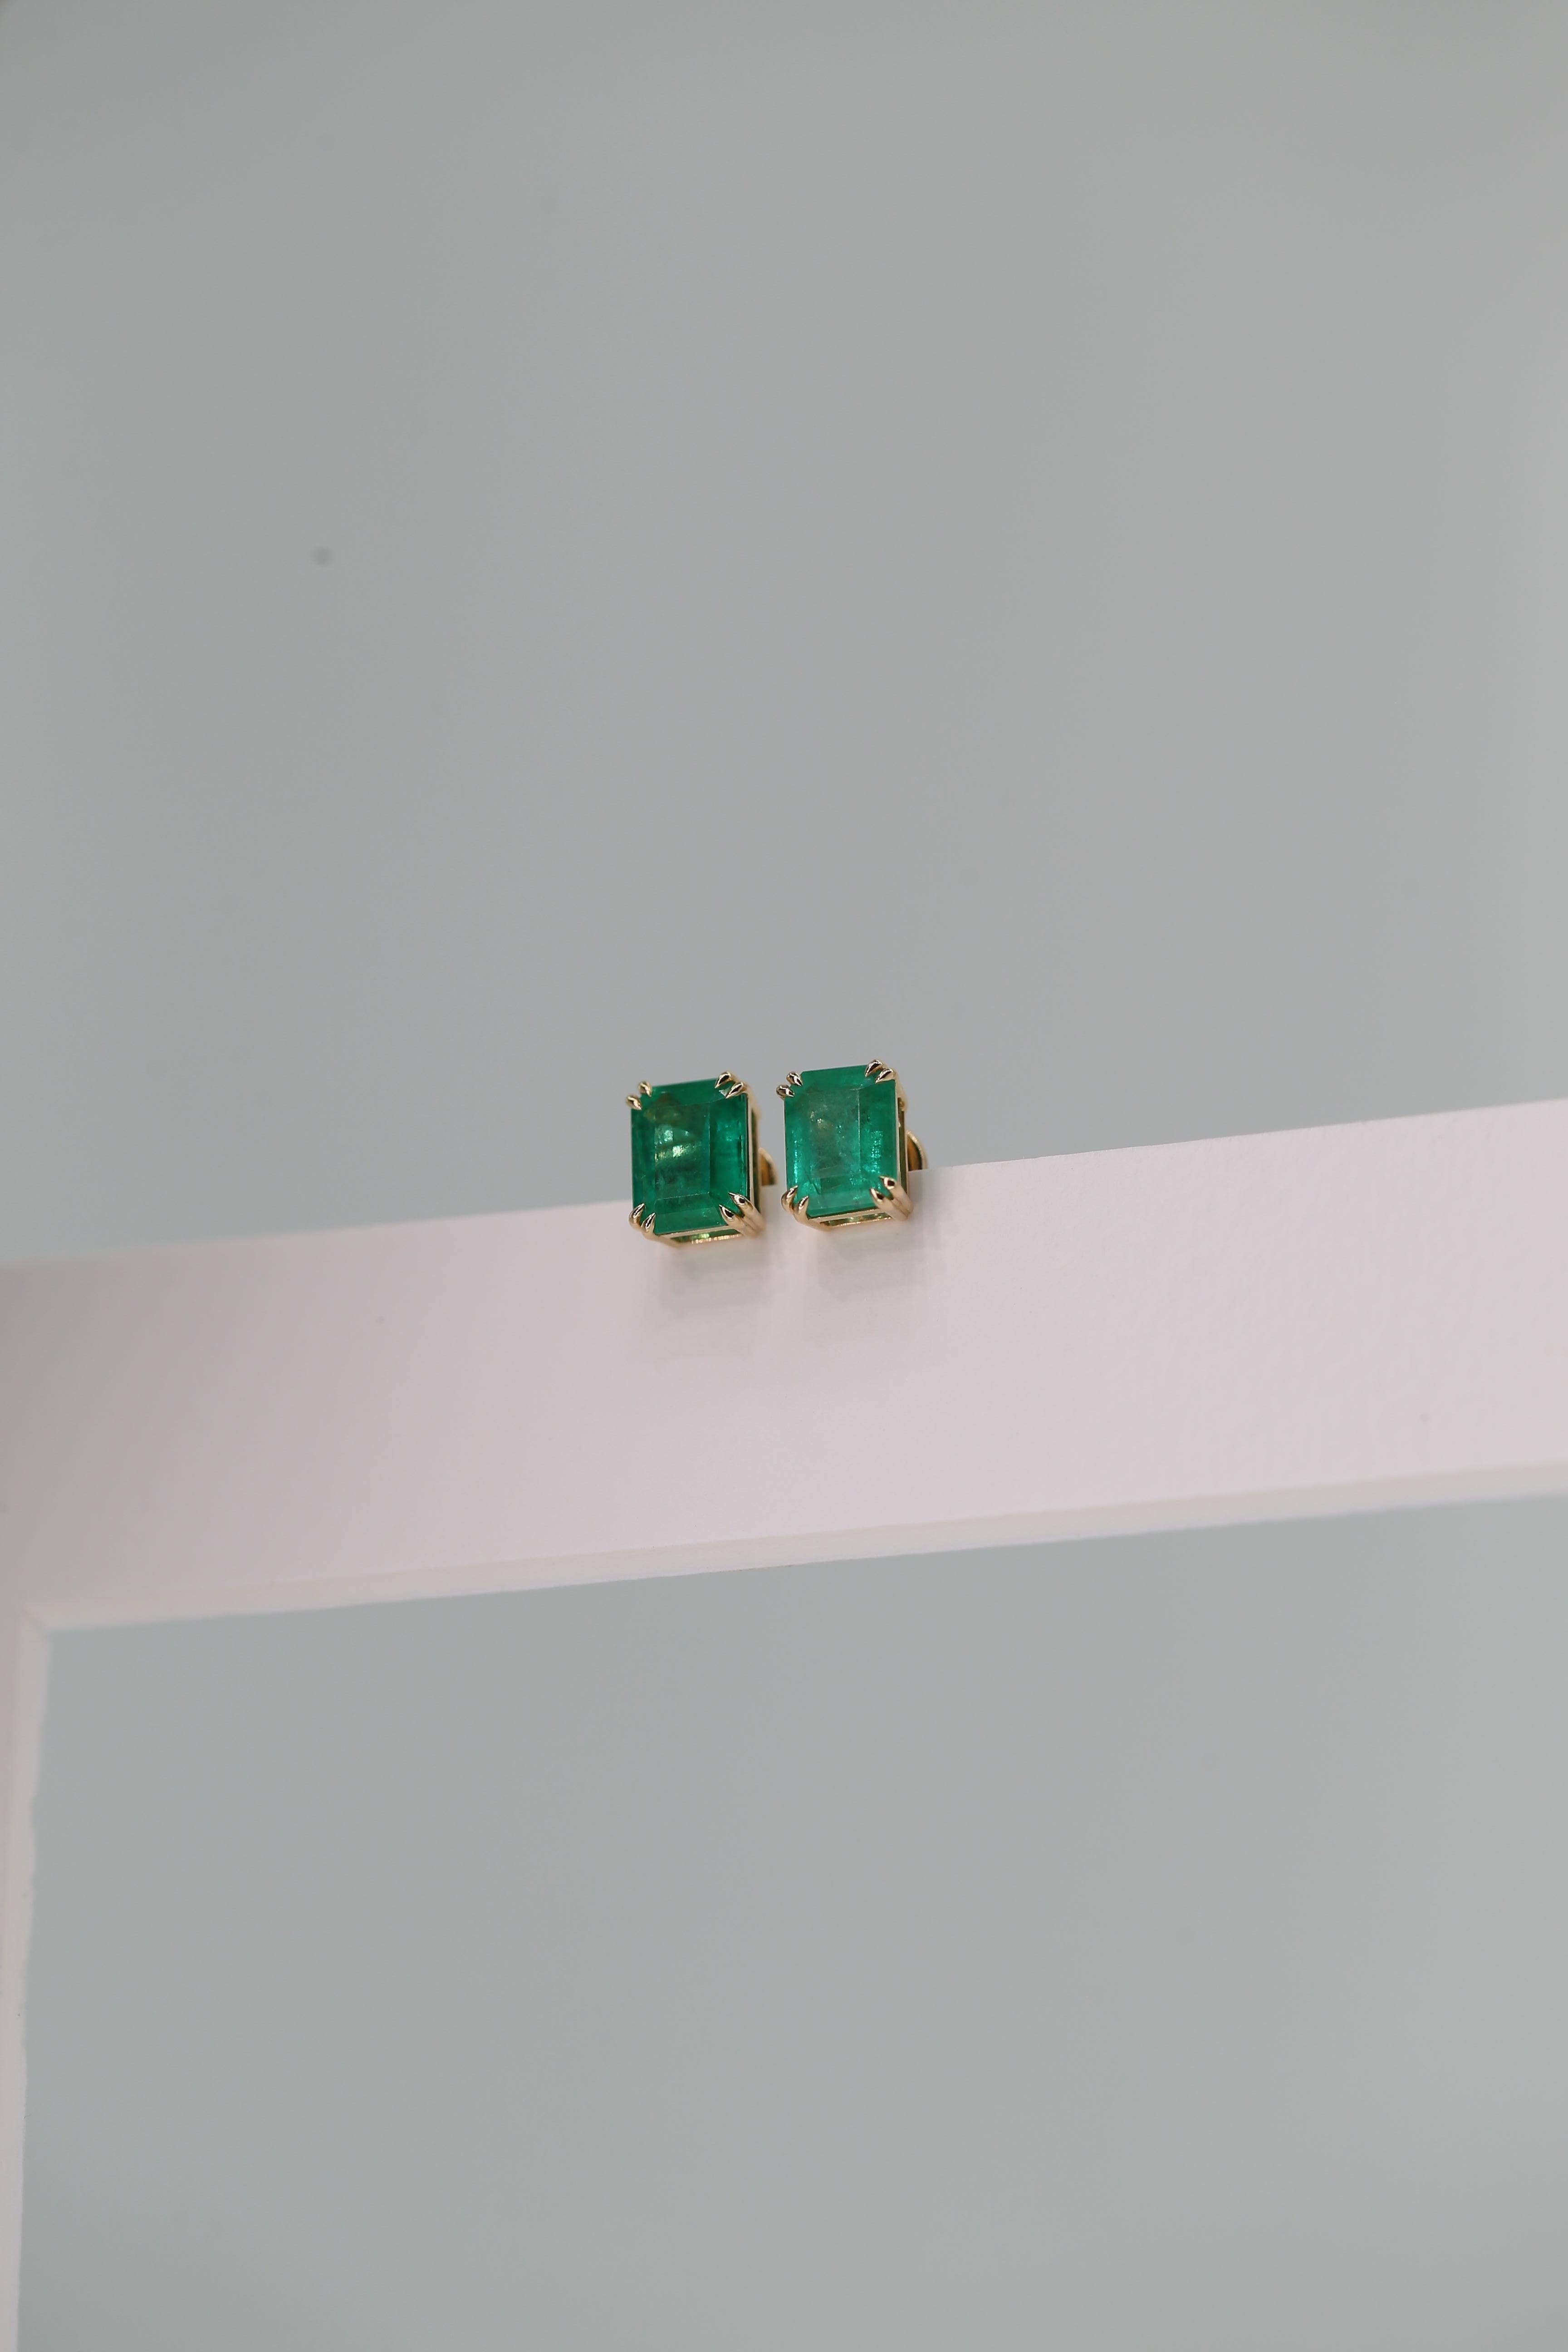 3.24 Carat Natural Emerald Stud Earrings 18k Yellow Gold
Primary Stones: 100% Natural Brazilian Emerald
Average Color/Clarity : Extraordinary Color AAA+ Medium Green/ Clarity, VS
Total Weight Emeralds: Approx. 3.24 Carats
Shape or Cut: Emerald